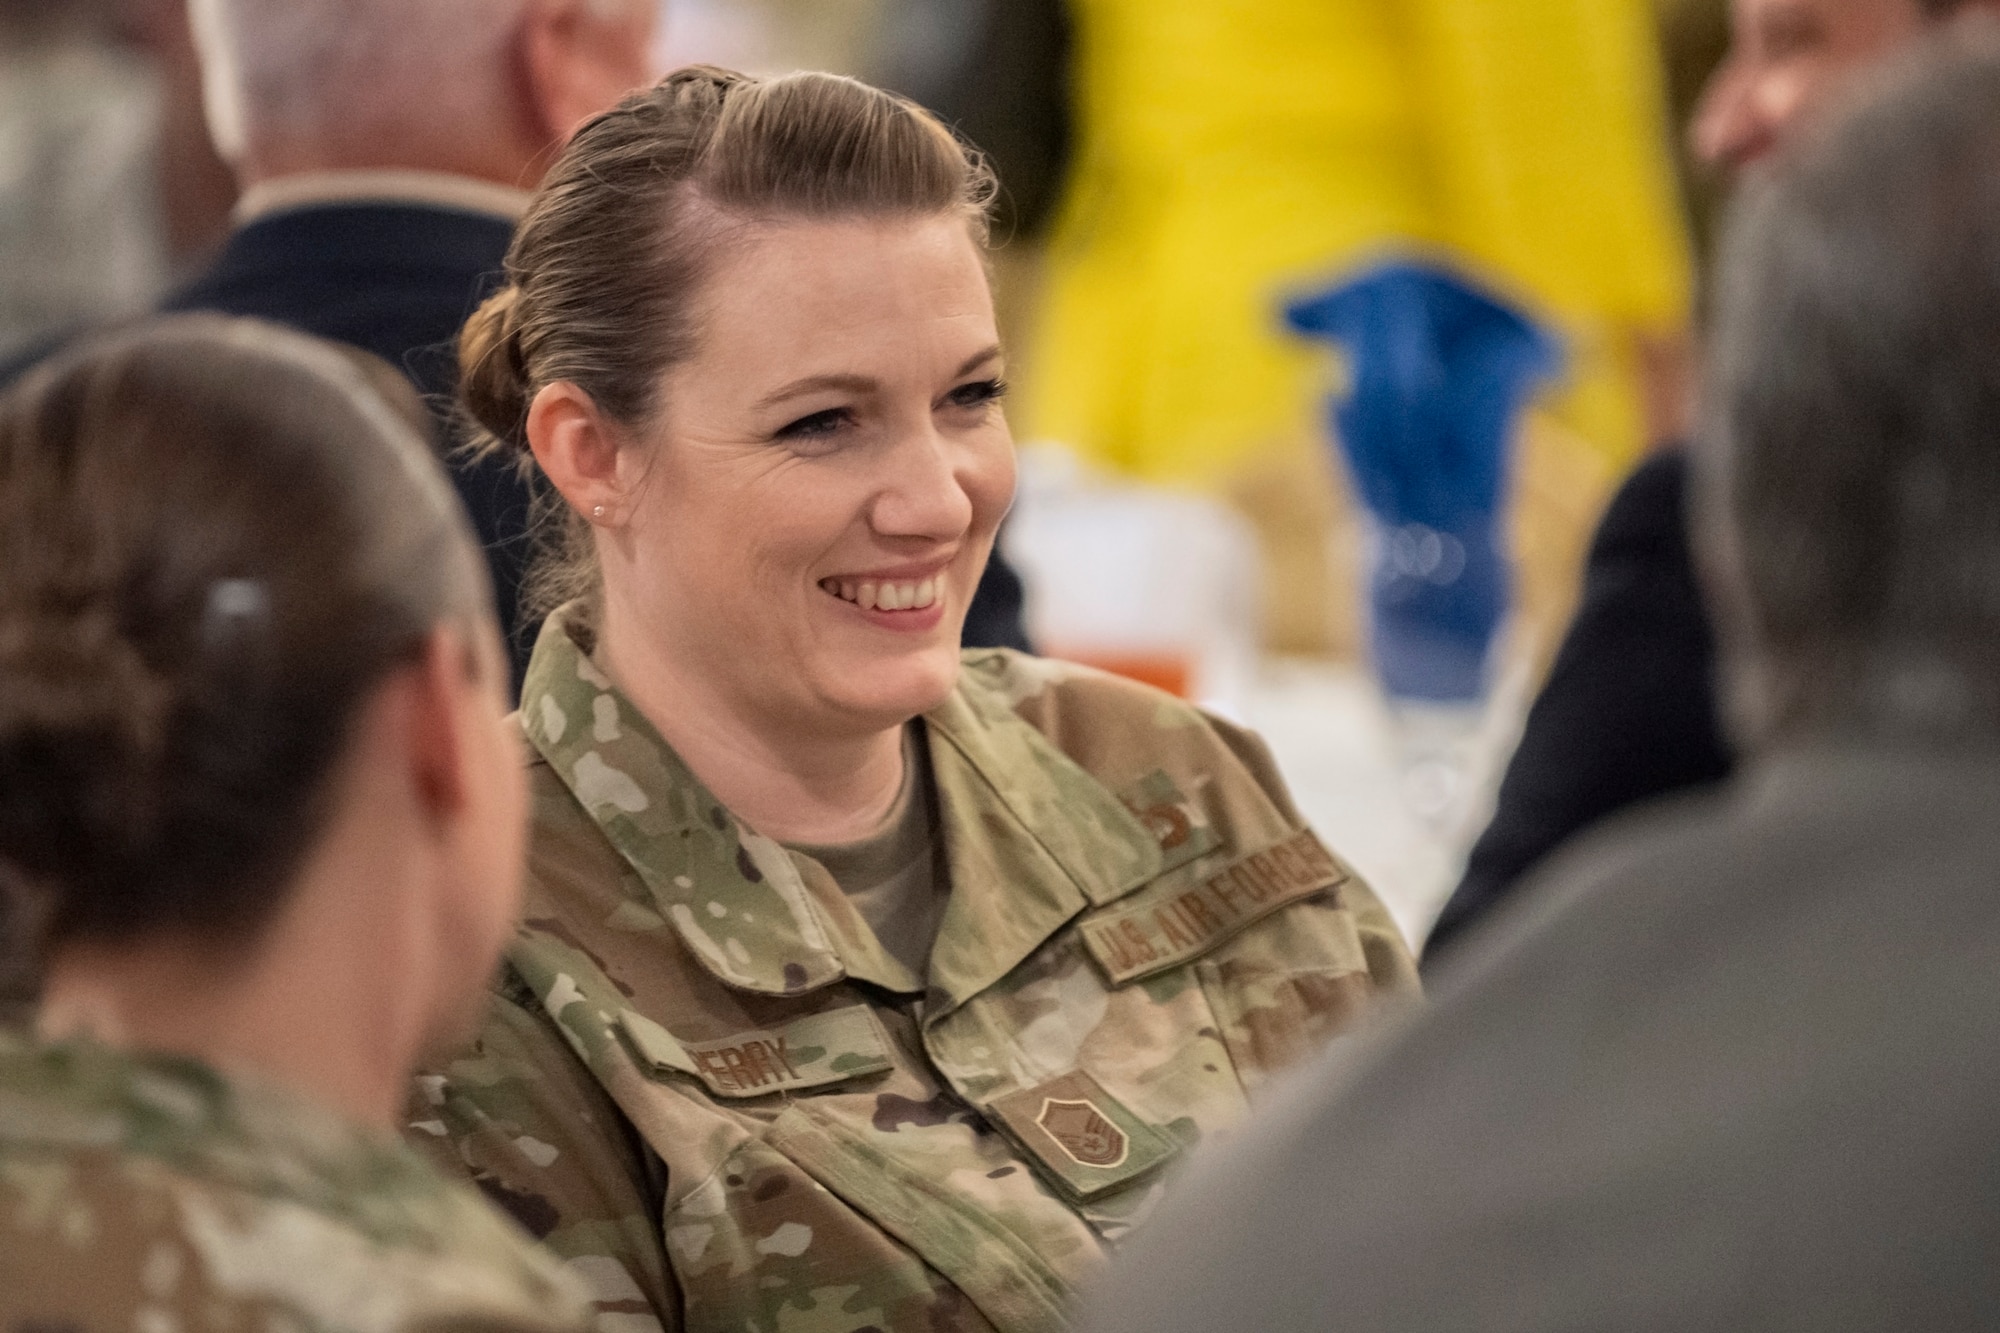 U.S. Air Force Master Sgt. Amber Perry, an inspections coordinator for the 307th Bomb Wing Inspector General, speaks with other guests during the Shreveport Bossier Military Affairs Council quarterly update luncheon at Barksdale Air Force Base, Louisiana, June 12, 2019. Perry earned a 2019 MAC scholarship, which she will use to achieve her bachelor's degree in emergency and disaster management. (U.S. Air Force photo by Senior Airman Maxwell Daigle)